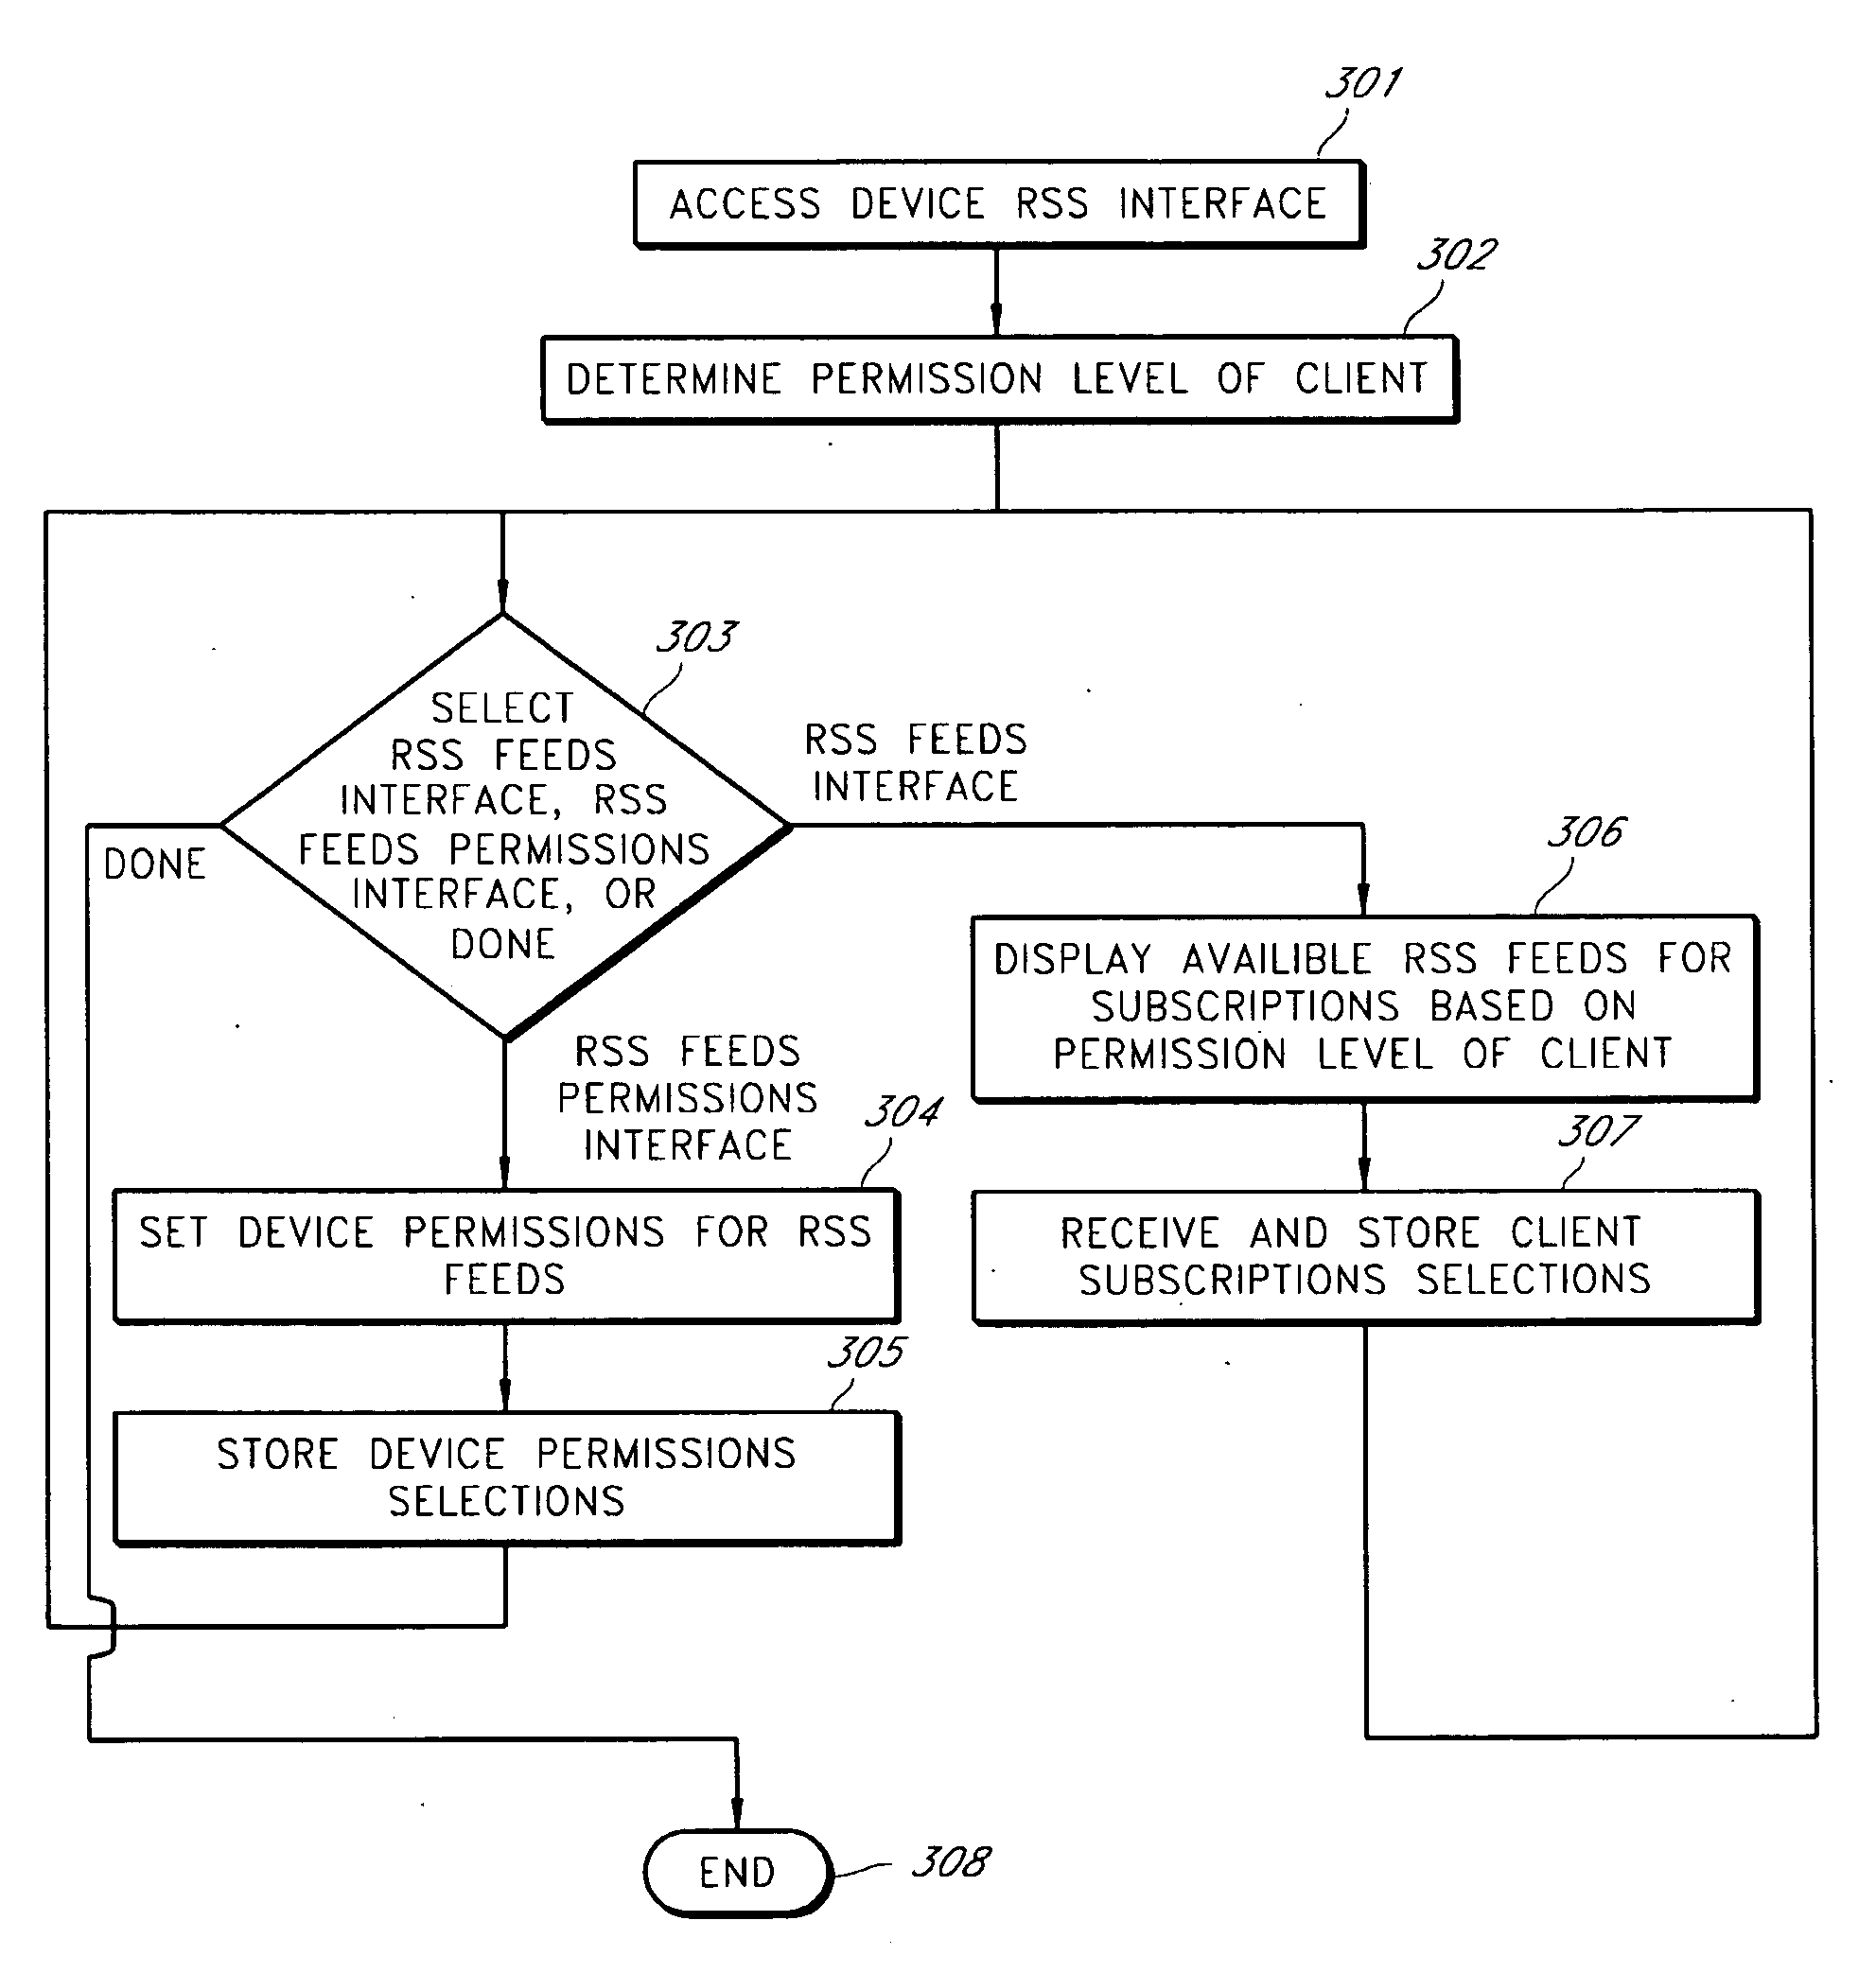 System and method for the remote operation and management of networked multi-function peripheral (MFP) devices via web feeds